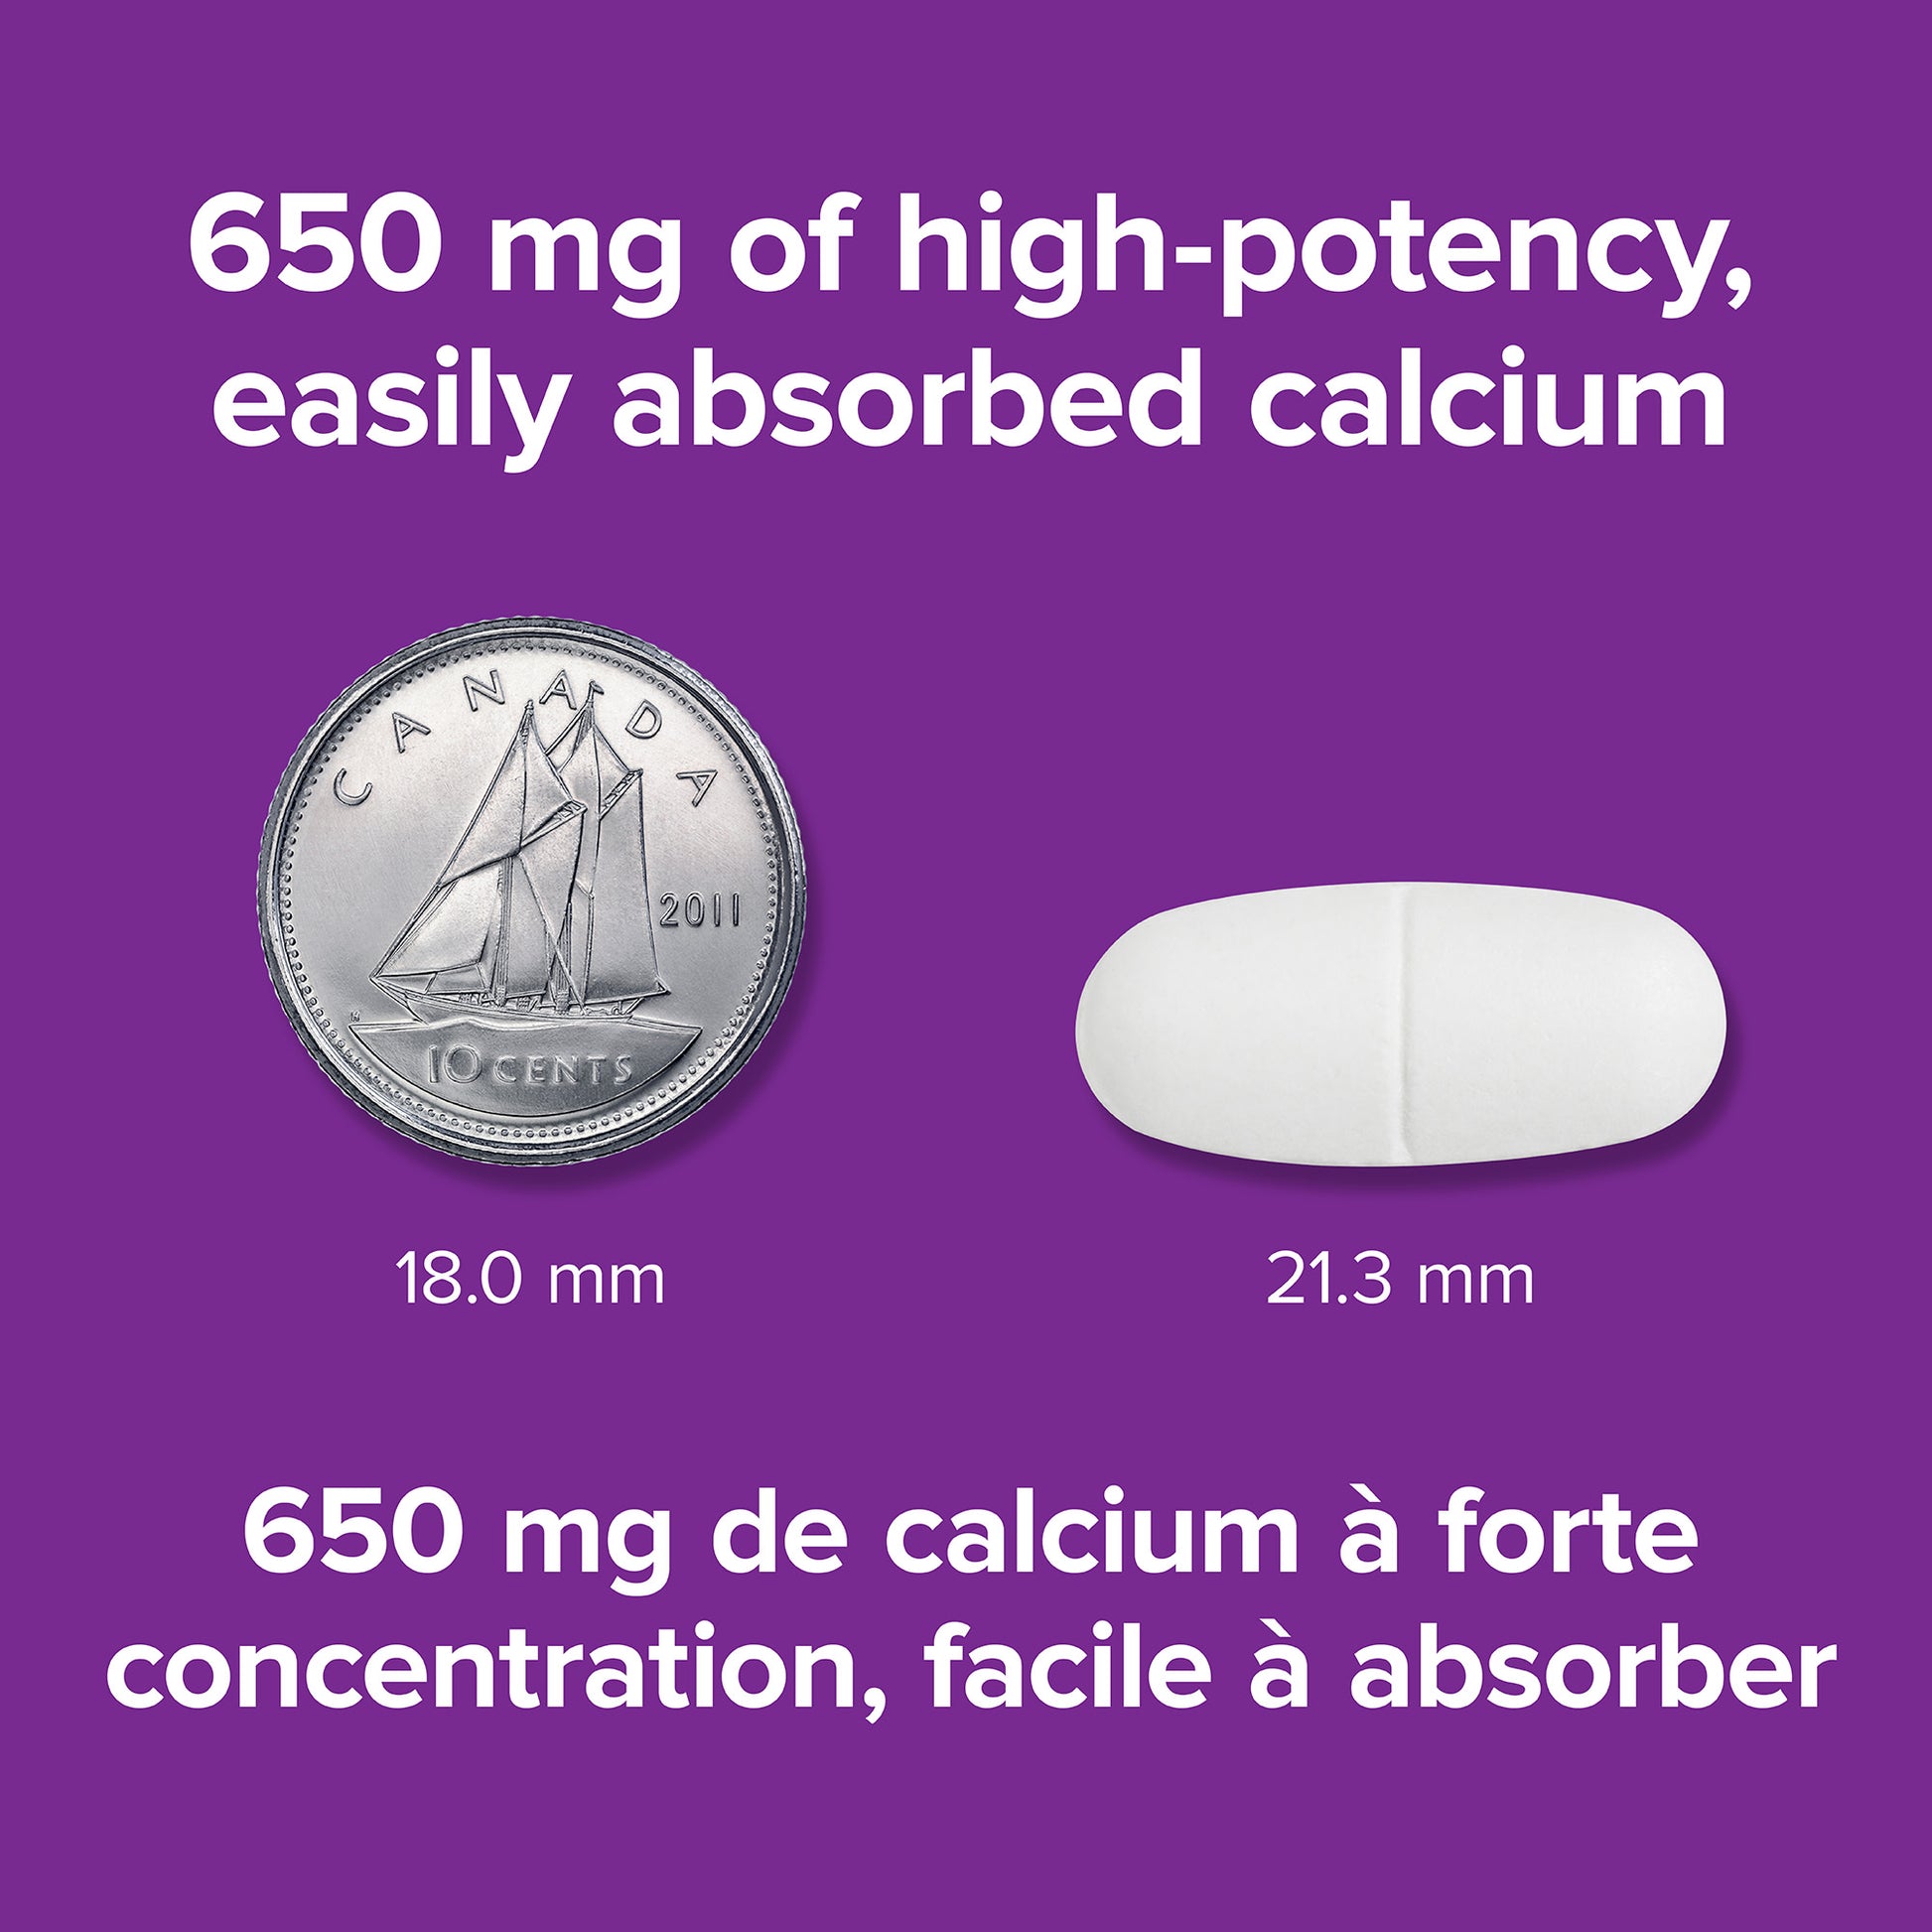 specifications-Ultra Calcium Absorption accrue 650 mg  for Webber Naturals